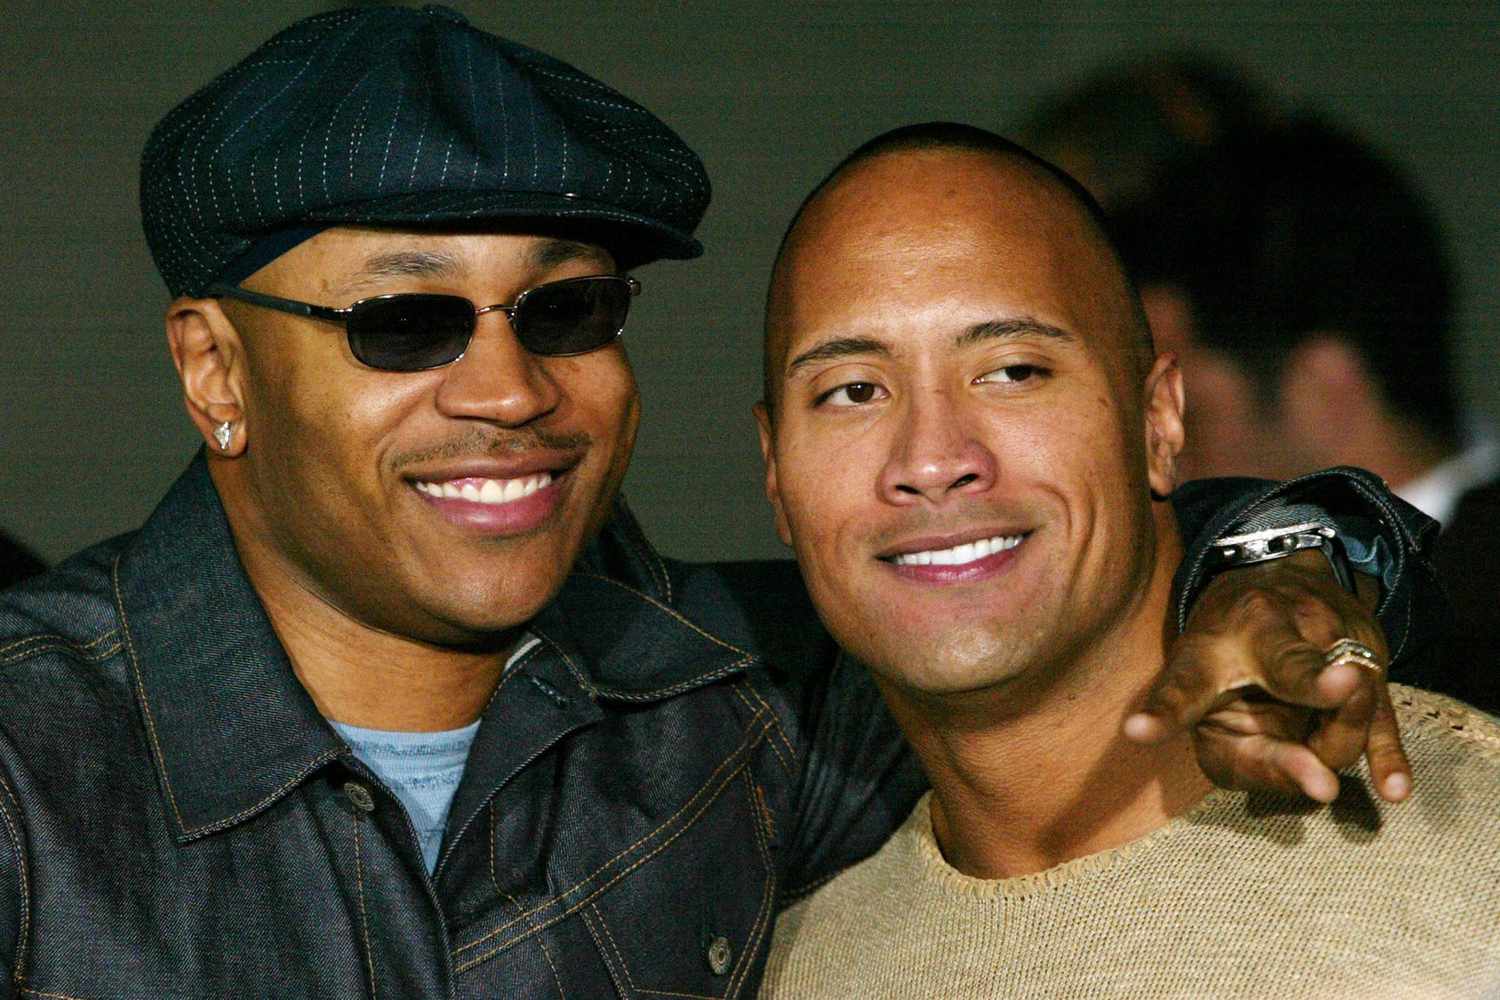 Dwayne 'The Rock' Johnson With LL Cool J at the World Premiere of Bulletproof Monk&nbsp;in Hollywood&nbsp;on April 9, 2003